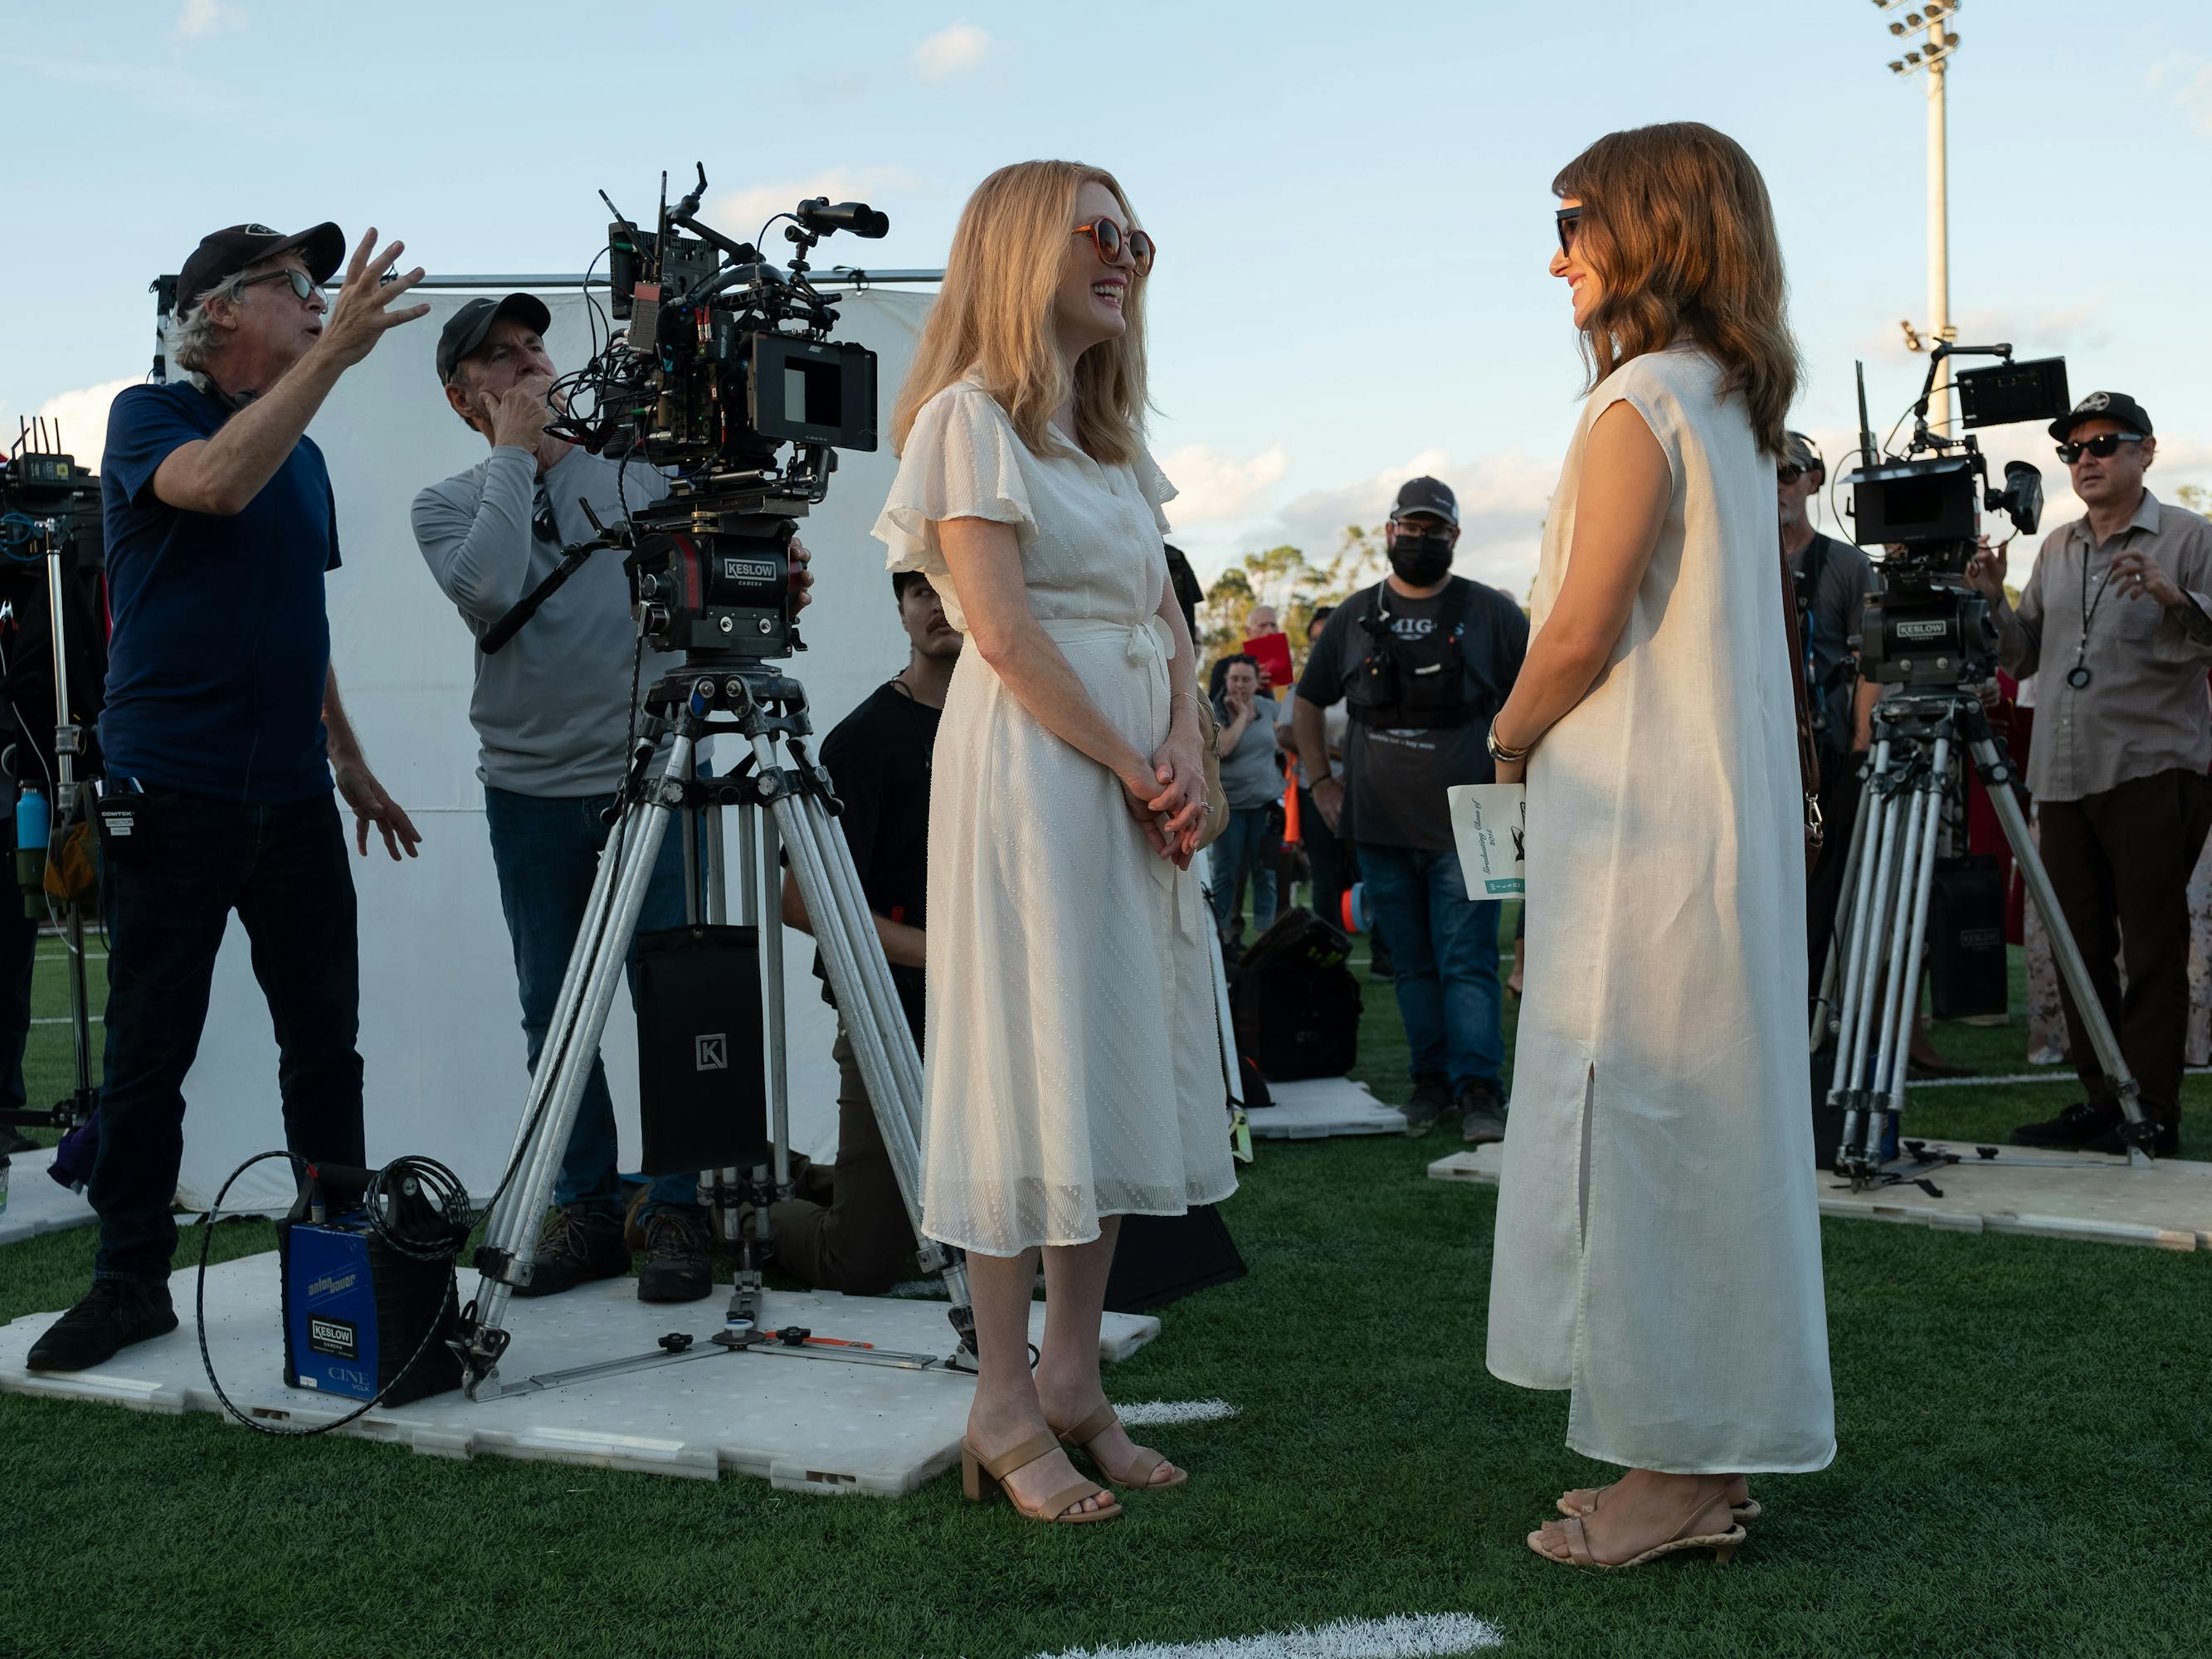 Todd Haynes, Julianne Moore, and Natalie Portman on set. Both women wear long white dresses and look quietly terrifying.